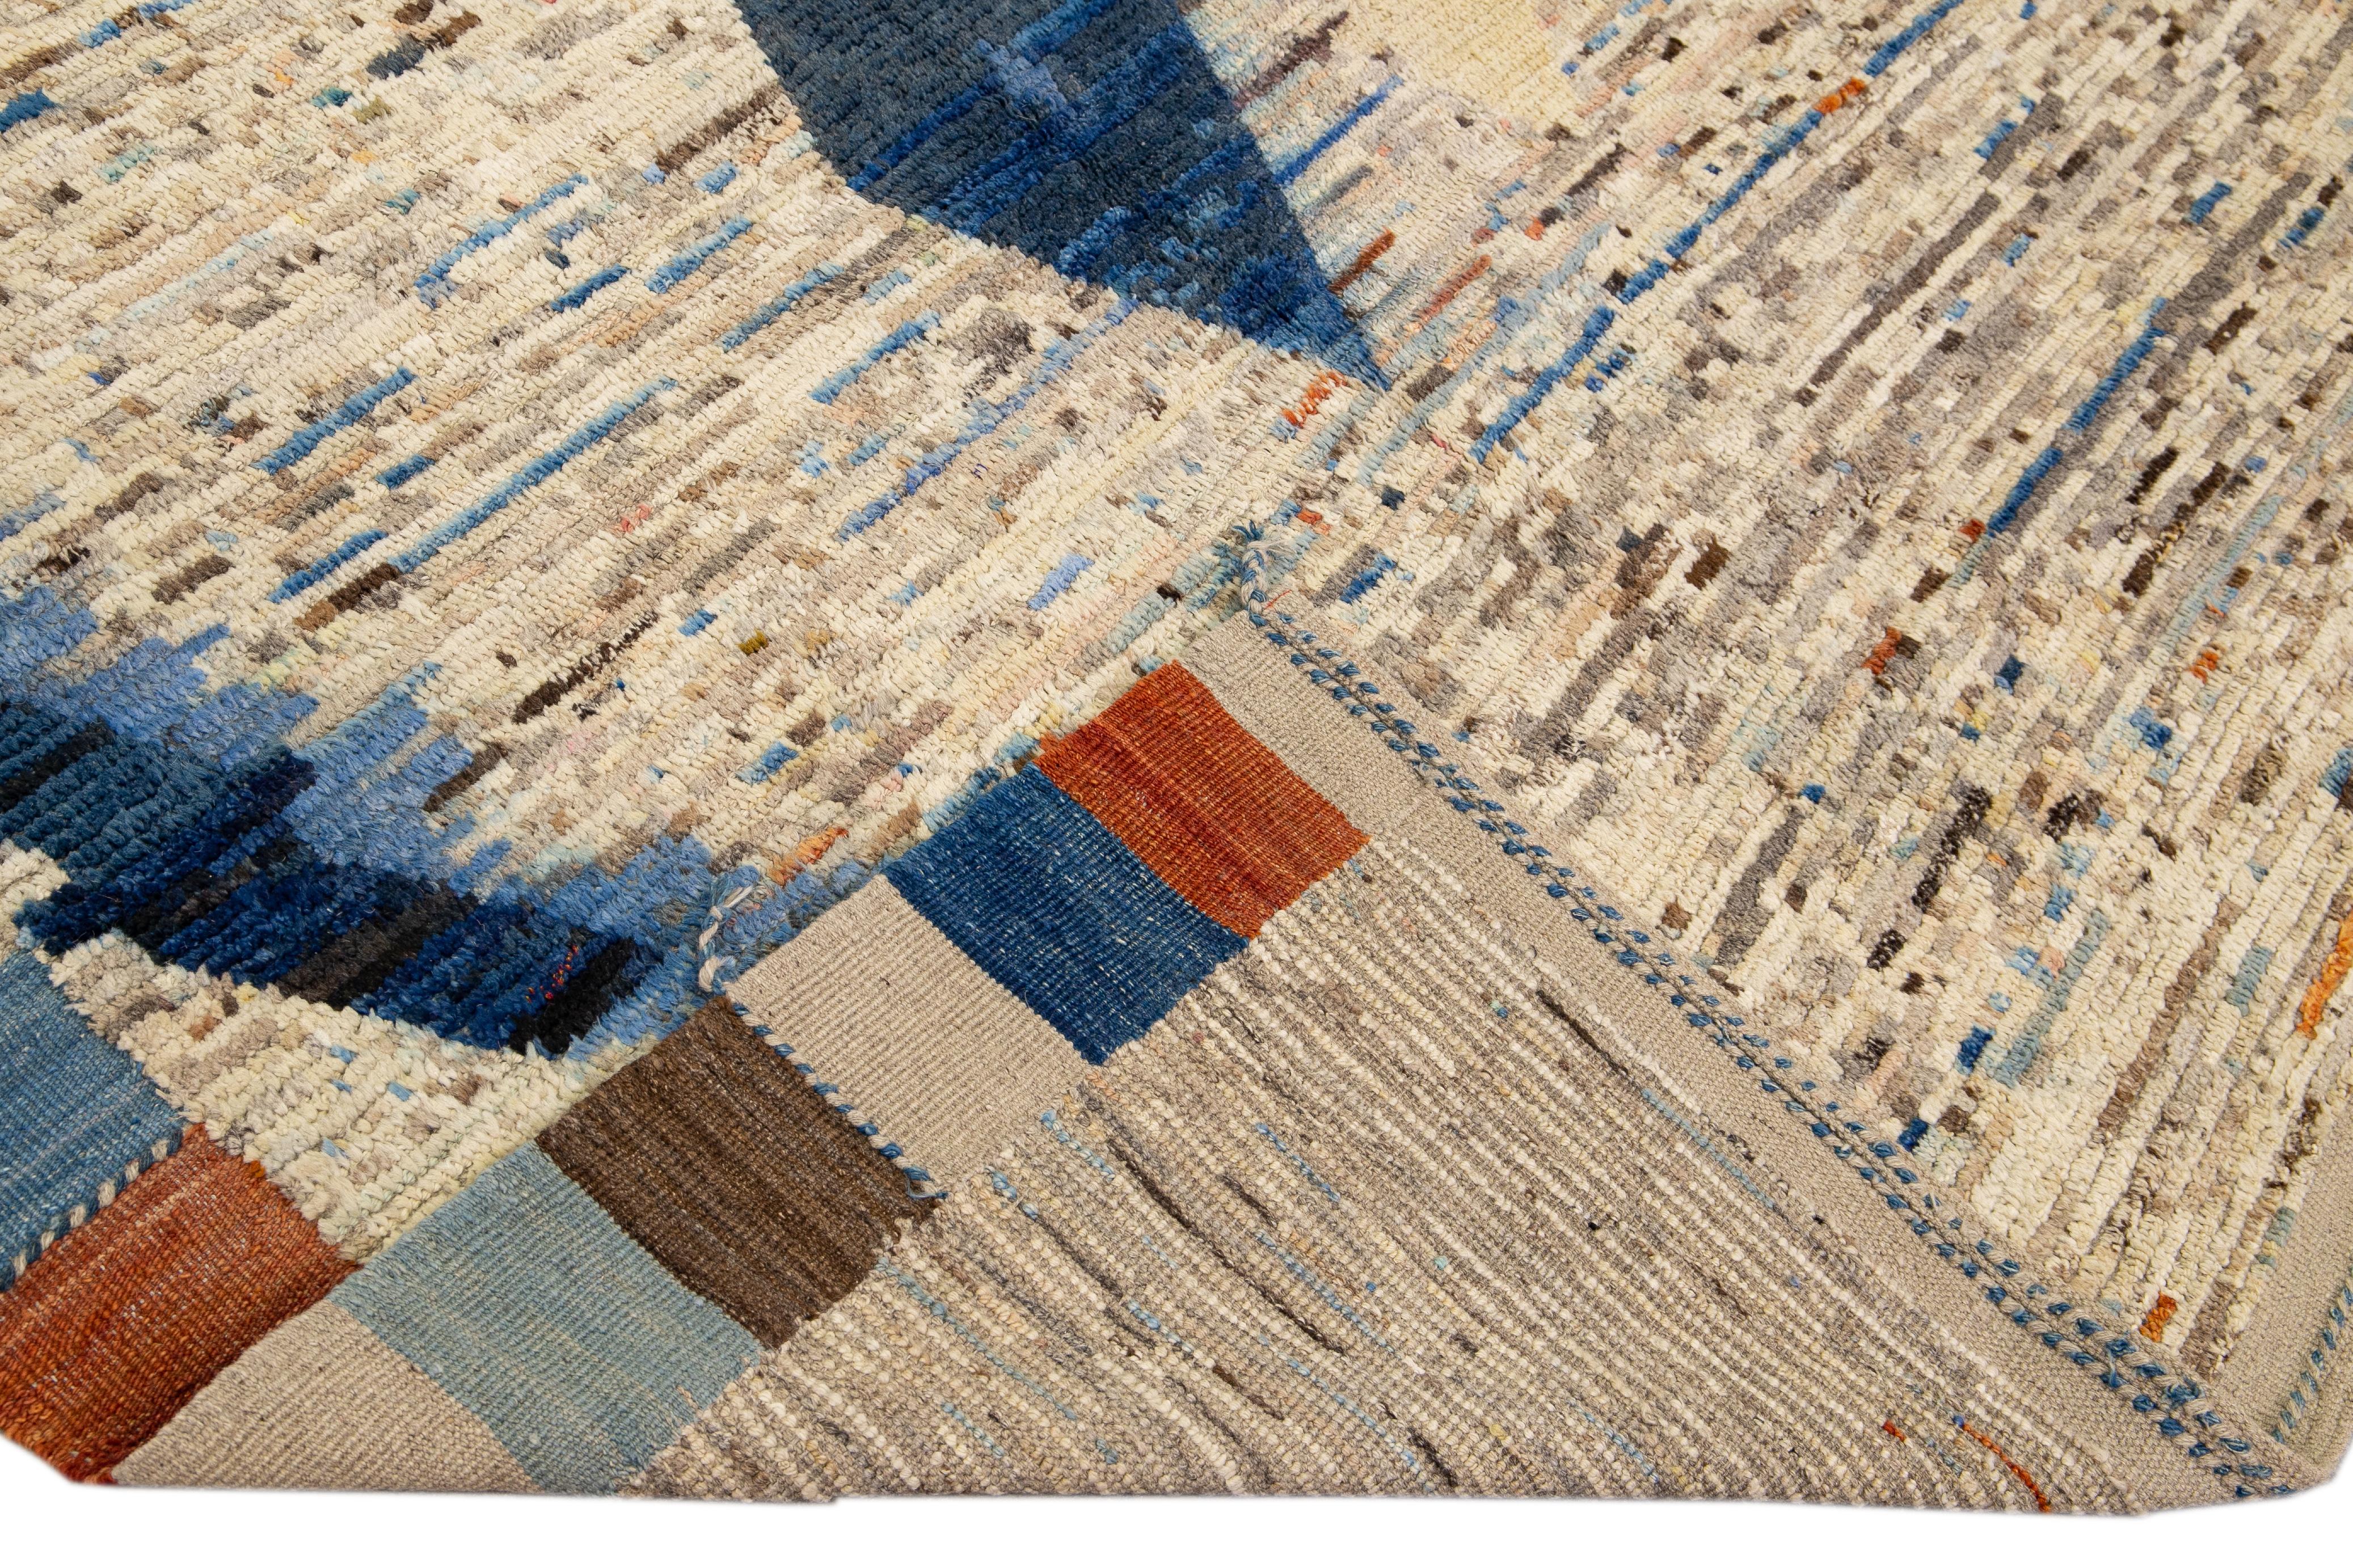 Beautiful Moroccan style handmade wool rug with a beige field. This Modern rug has blue and orange accents and beige-blue braid fringes featuring a gorgeous all-over geometric boho design.

This rug measures: 8'9